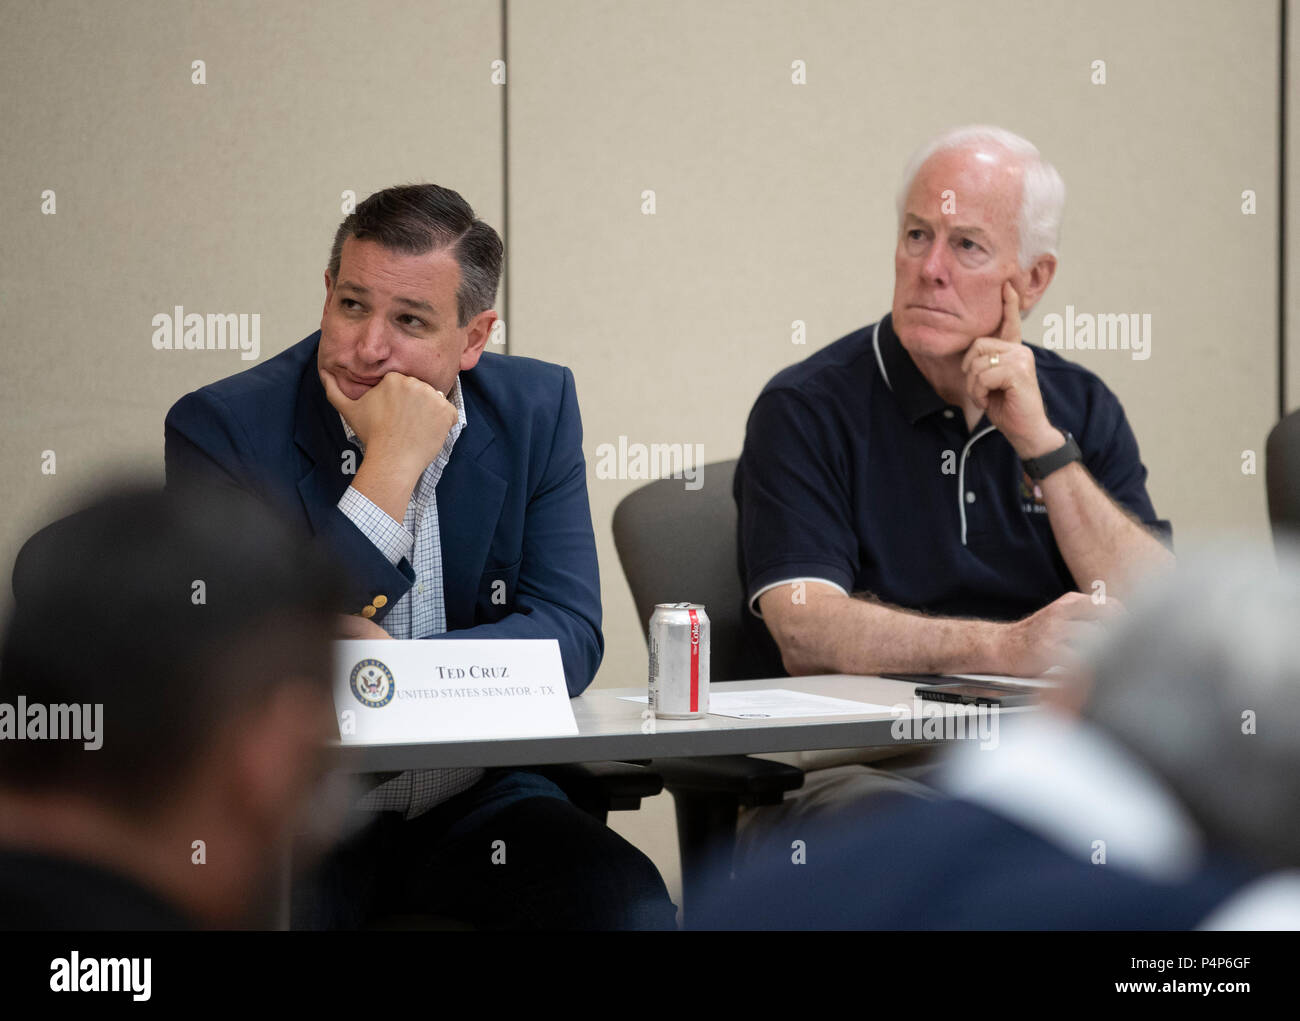 U.S. Senators Ted Cruz, left, and John Cornyn listen as federal and Texas officials and stakeholders meet in a round-table discussion of the immigration crisis hitting the Texas-Mexico border. Confusion and public outrage reigned regarding the Trump administration's policy of separating undocumented immigrant parents from their children after crossing into the U.S. from Mexico. Stock Photo